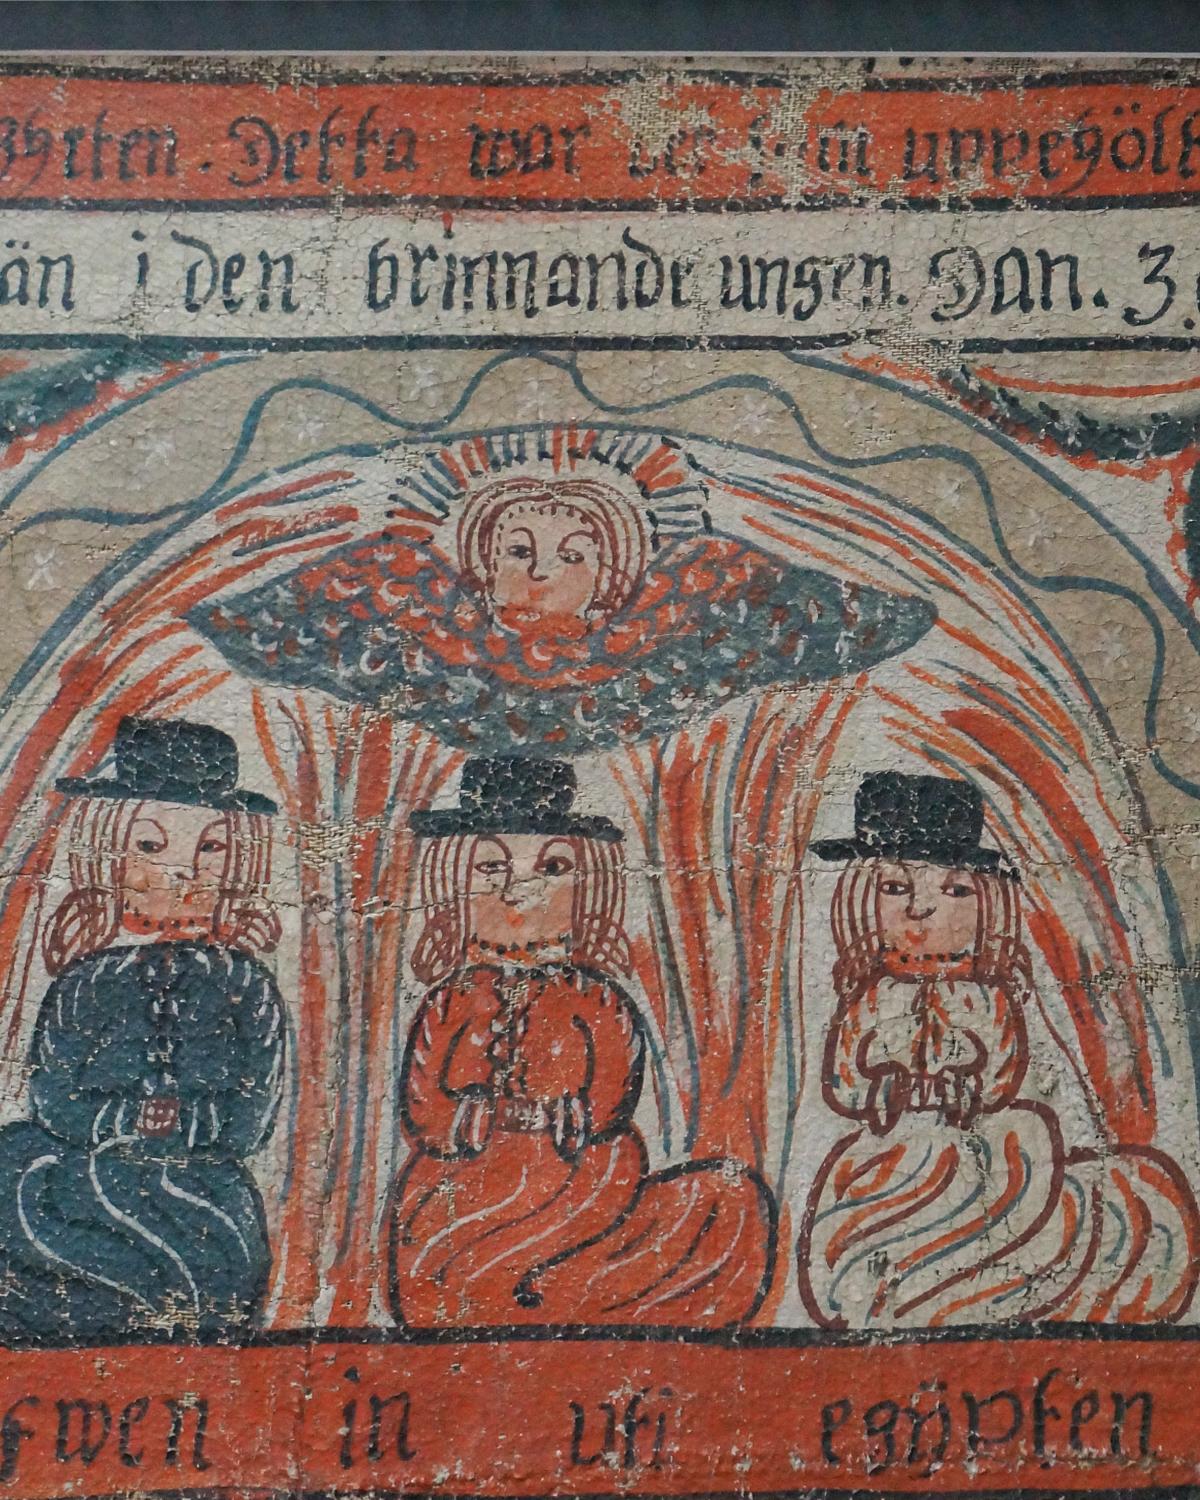 Fragment of a bonad, Sweden dated 1818, showing three kneeling figures surrounded by fire and protected by a hovering angel. Note the misspelling of “ugnen”, furnace, as “ungen.” Below is a partial row of kneeling men, probably Joseph’s brothers.